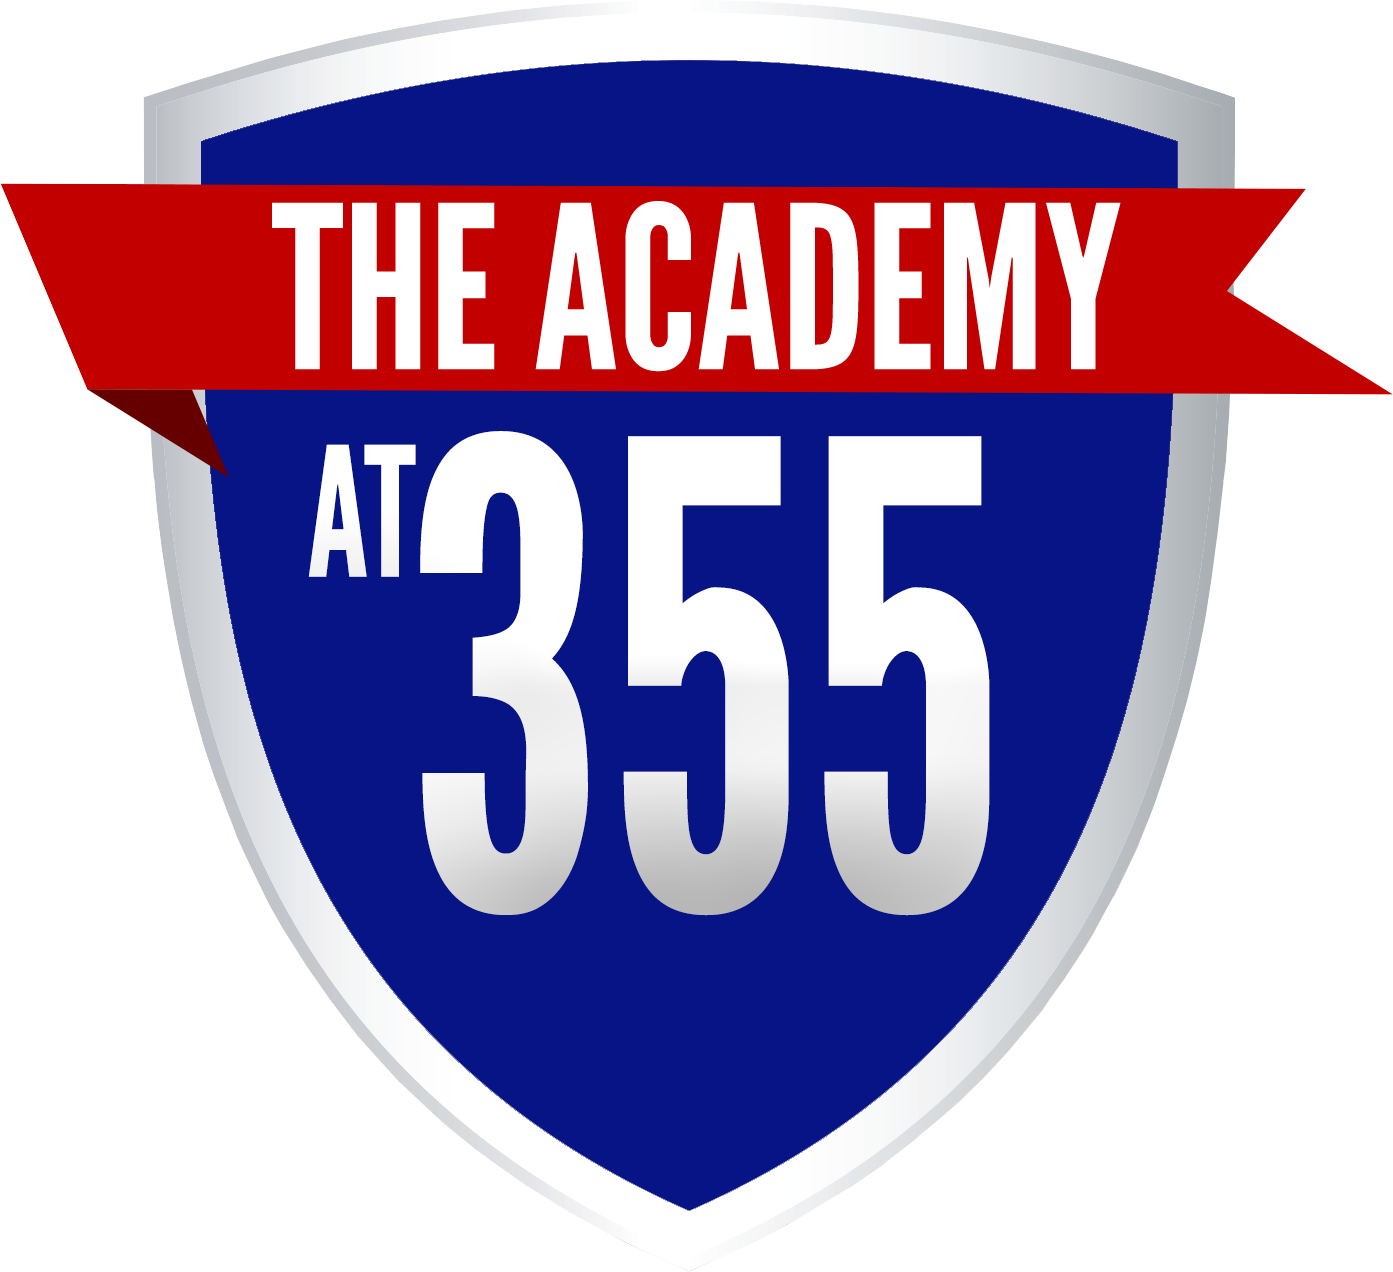  The Academy at 355